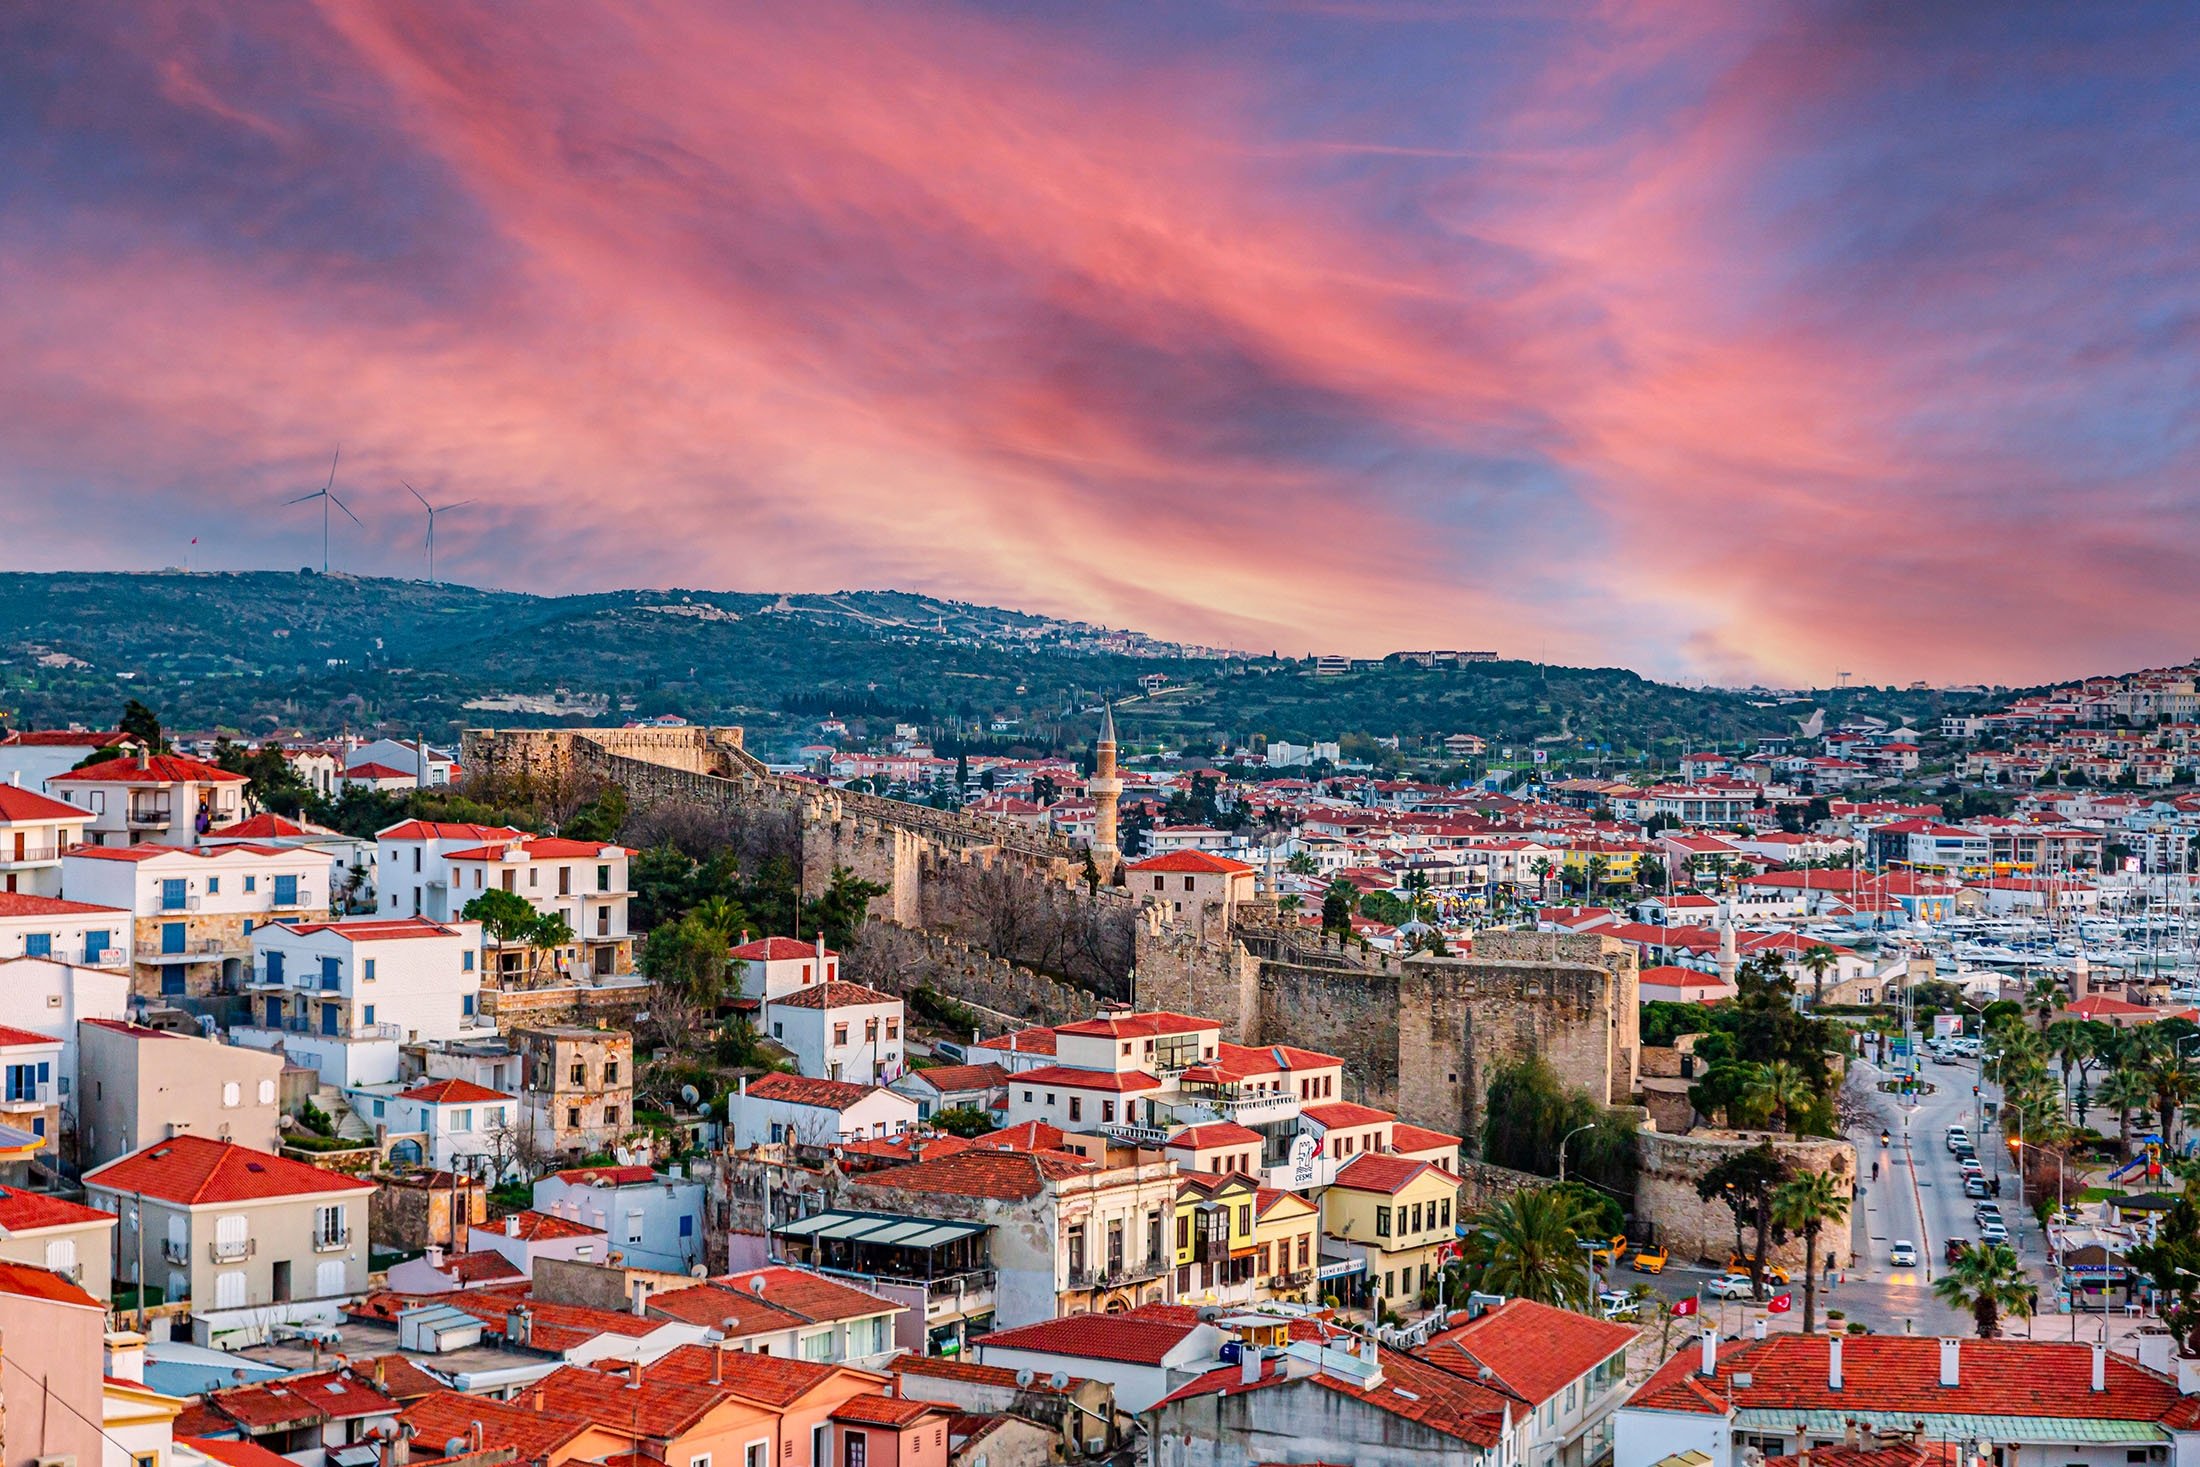 A view of Çeşme and its castle and city center, in Izmir, western Turkey, March 11, 2019. (Shutterstock Photo)